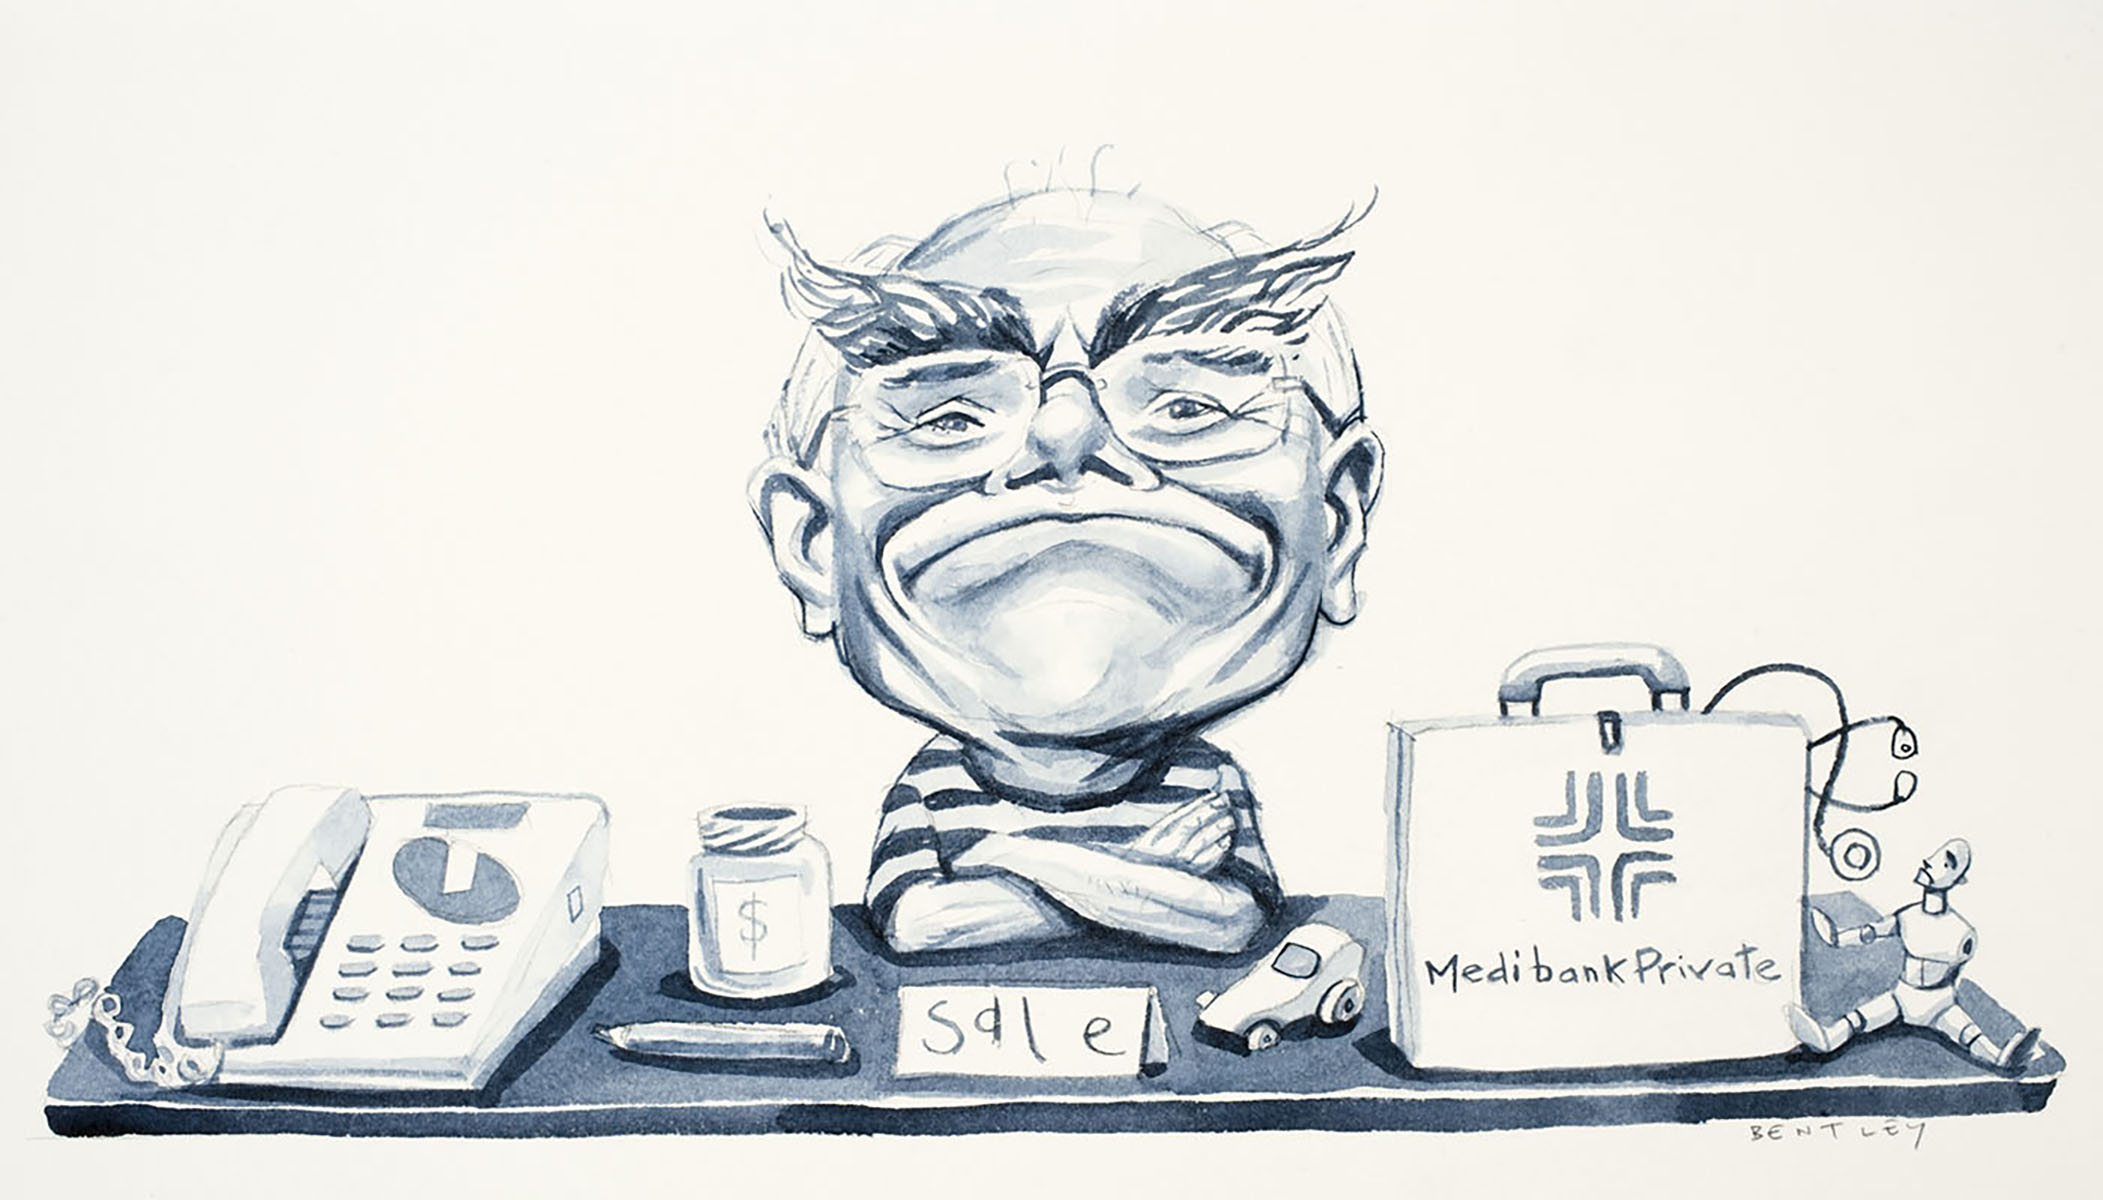 Political cartoon of John Howard as a young boy, holding a garage sale with items including a Telstra telephone and a Medibank Private suitcase. - click to view larger image